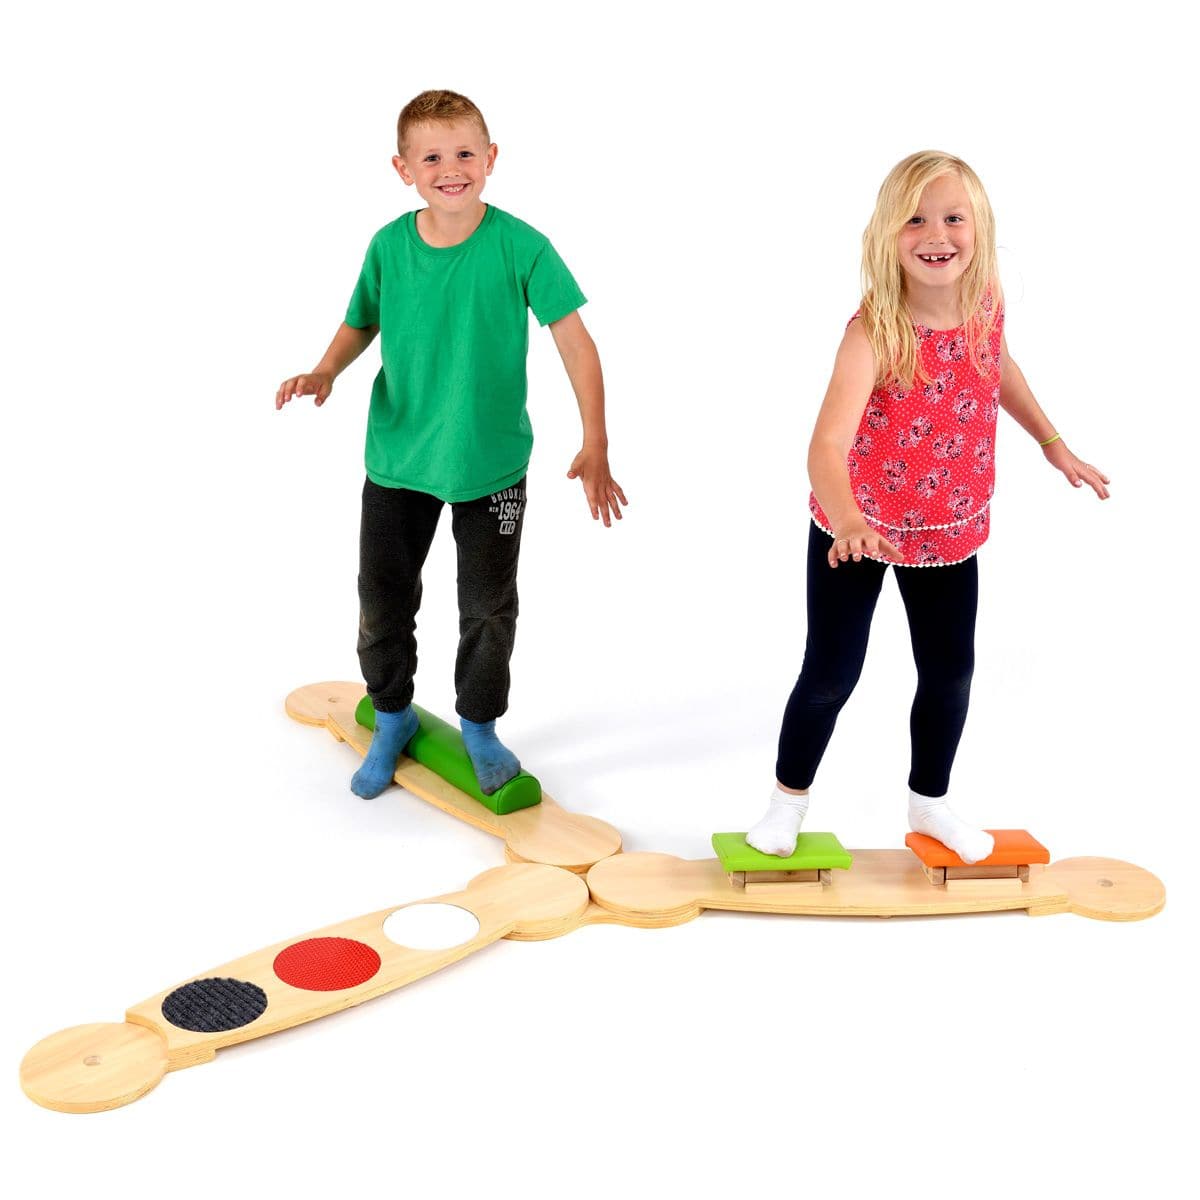 Balance Beams Set 1, The Wisdom Balance Beams Set 1 includes a 3-way linking island and 3 beams - cross balance board, tactile balance board and a bridge balance board. Each balance board measures 96 x 20cm, and the 3-way linking island measures 39 x 37cm. The Wisdom Balance Beams Set 1 is perfect for developing and stimulating balance, and collaborative play skills. These sensory balance beams are available in 3 different sets. There are no screws or assembly required – just click and go. The main body and